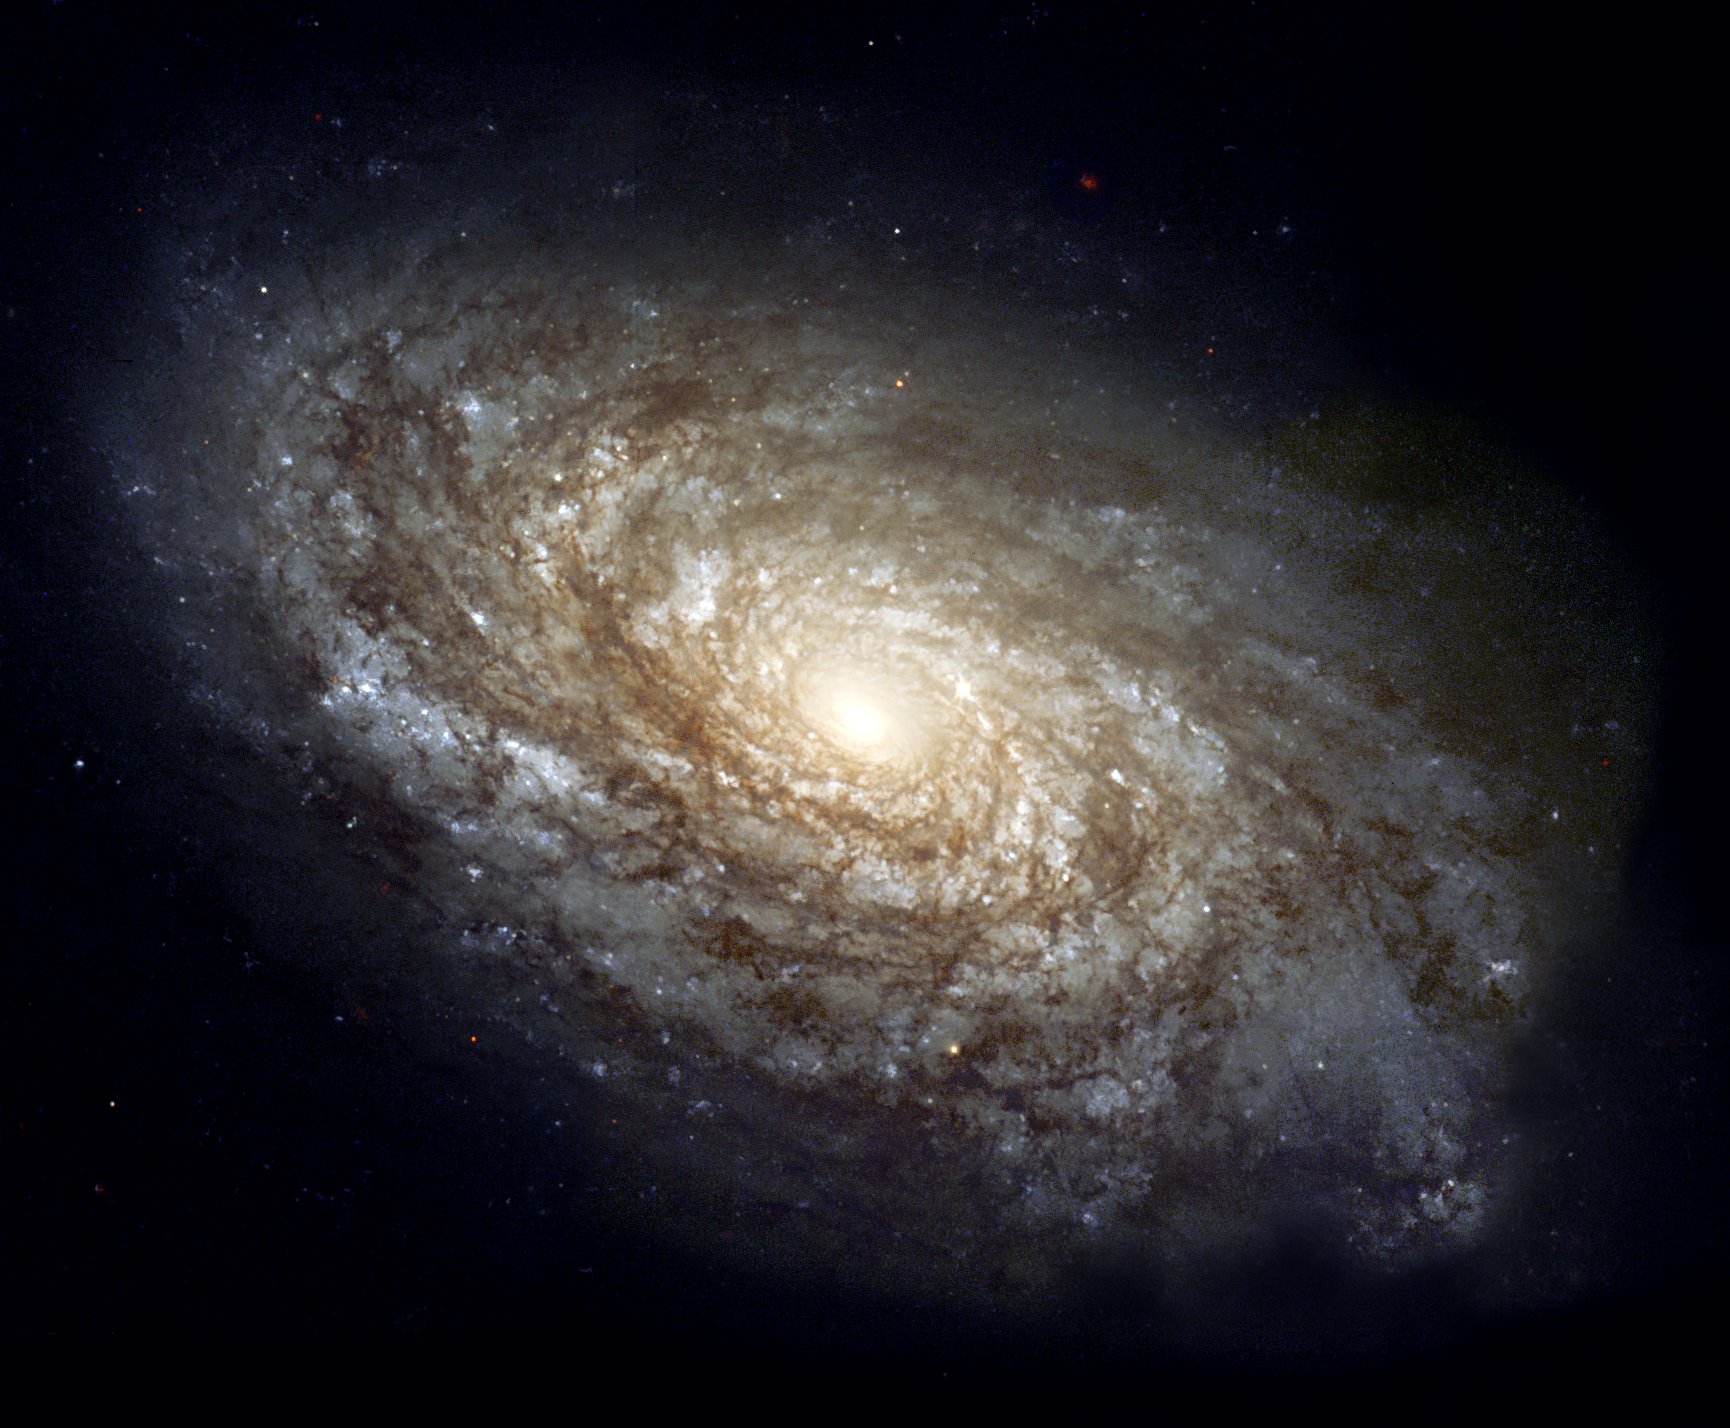 Galaxy NGC4414 helped astronomers find the rate of expansion of the universe.